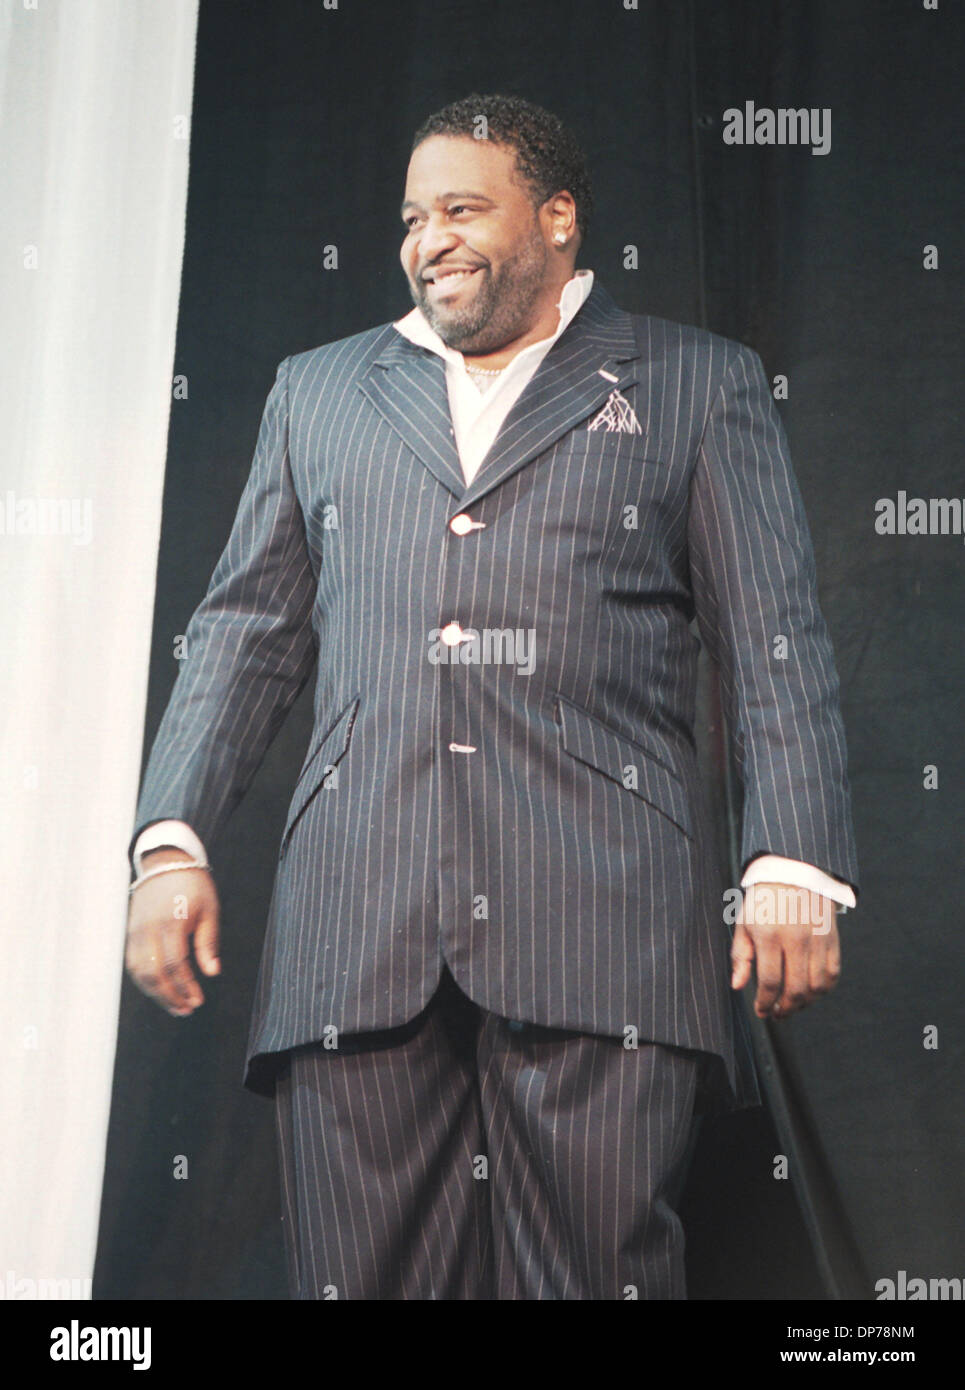 Nov 10, 2006; Raleigh, North Carolina, USA; Singer GERALD LEVERT the R&B singer whose hits included 'I Swear' and 'I'd Give Anything,' as well as chart-toppers with the groups LeVert and LSG, has died, according to his label, Atlantic Records. He was 40. Levert died of a heart attack Friday at his Cleveland, Ohio, home, according a statement from Atlantic. Seen performing Jun 25, 2 Stock Photo